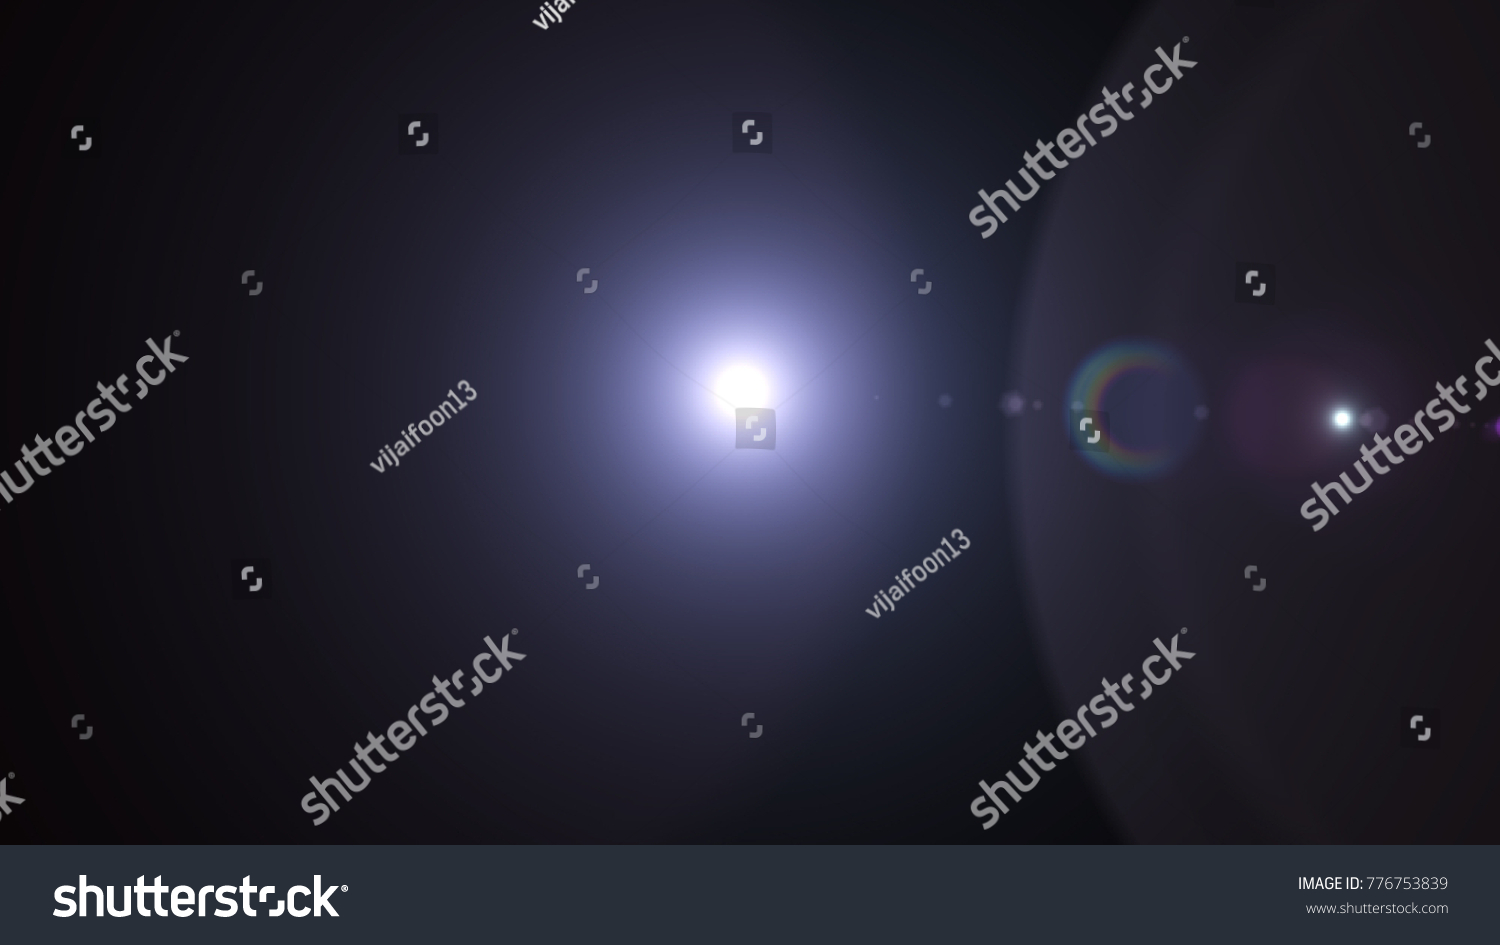 Digital Natural lens flare , Abstract overlays background. #776753839